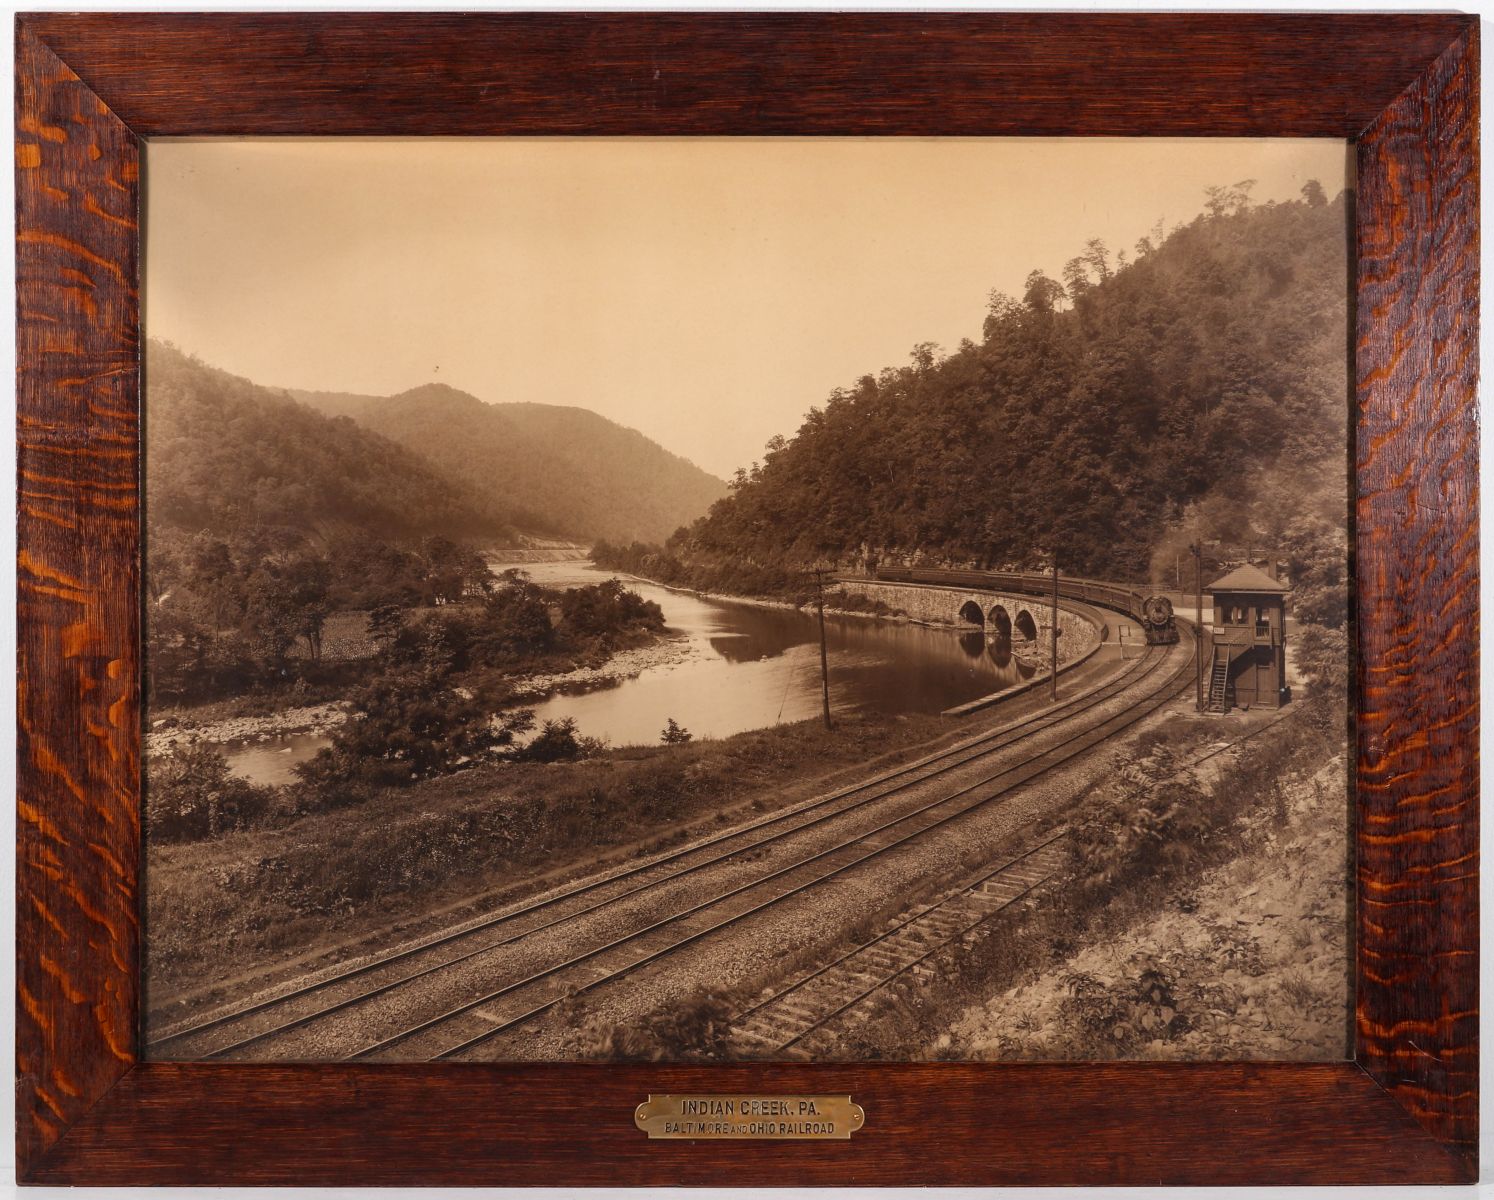 A PHOTOGRAVURE VIEW OF INDIAN CREEK PA ON THE B&O